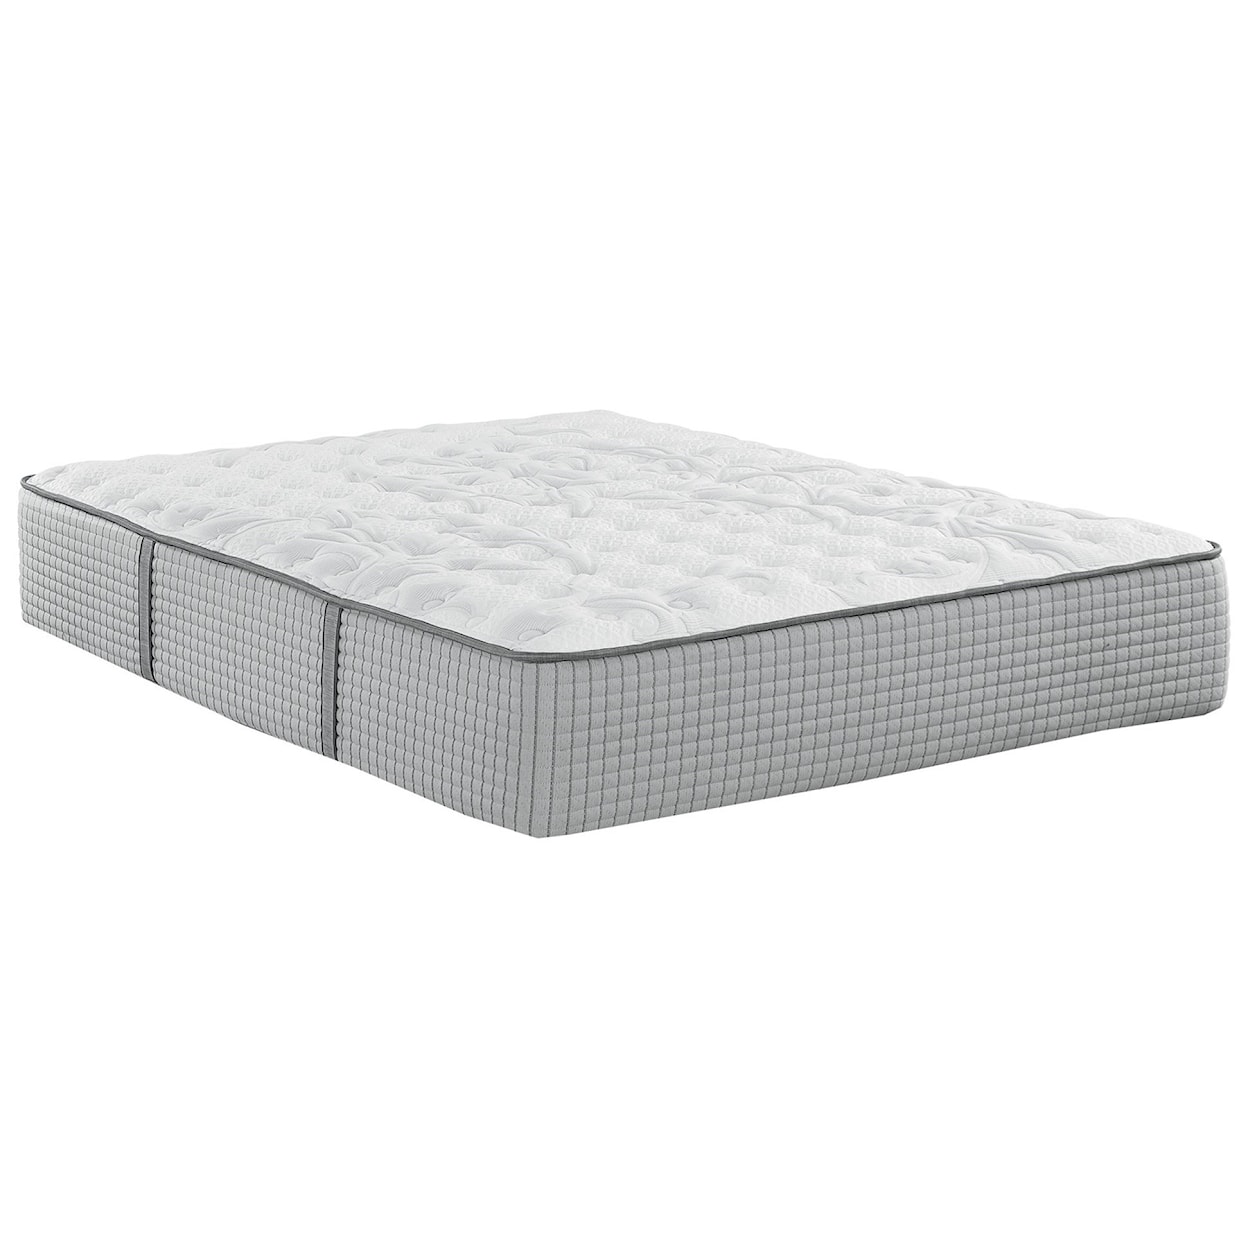 Restonic Biltmore House Firm Twin Firm Coil on Coil Mattress